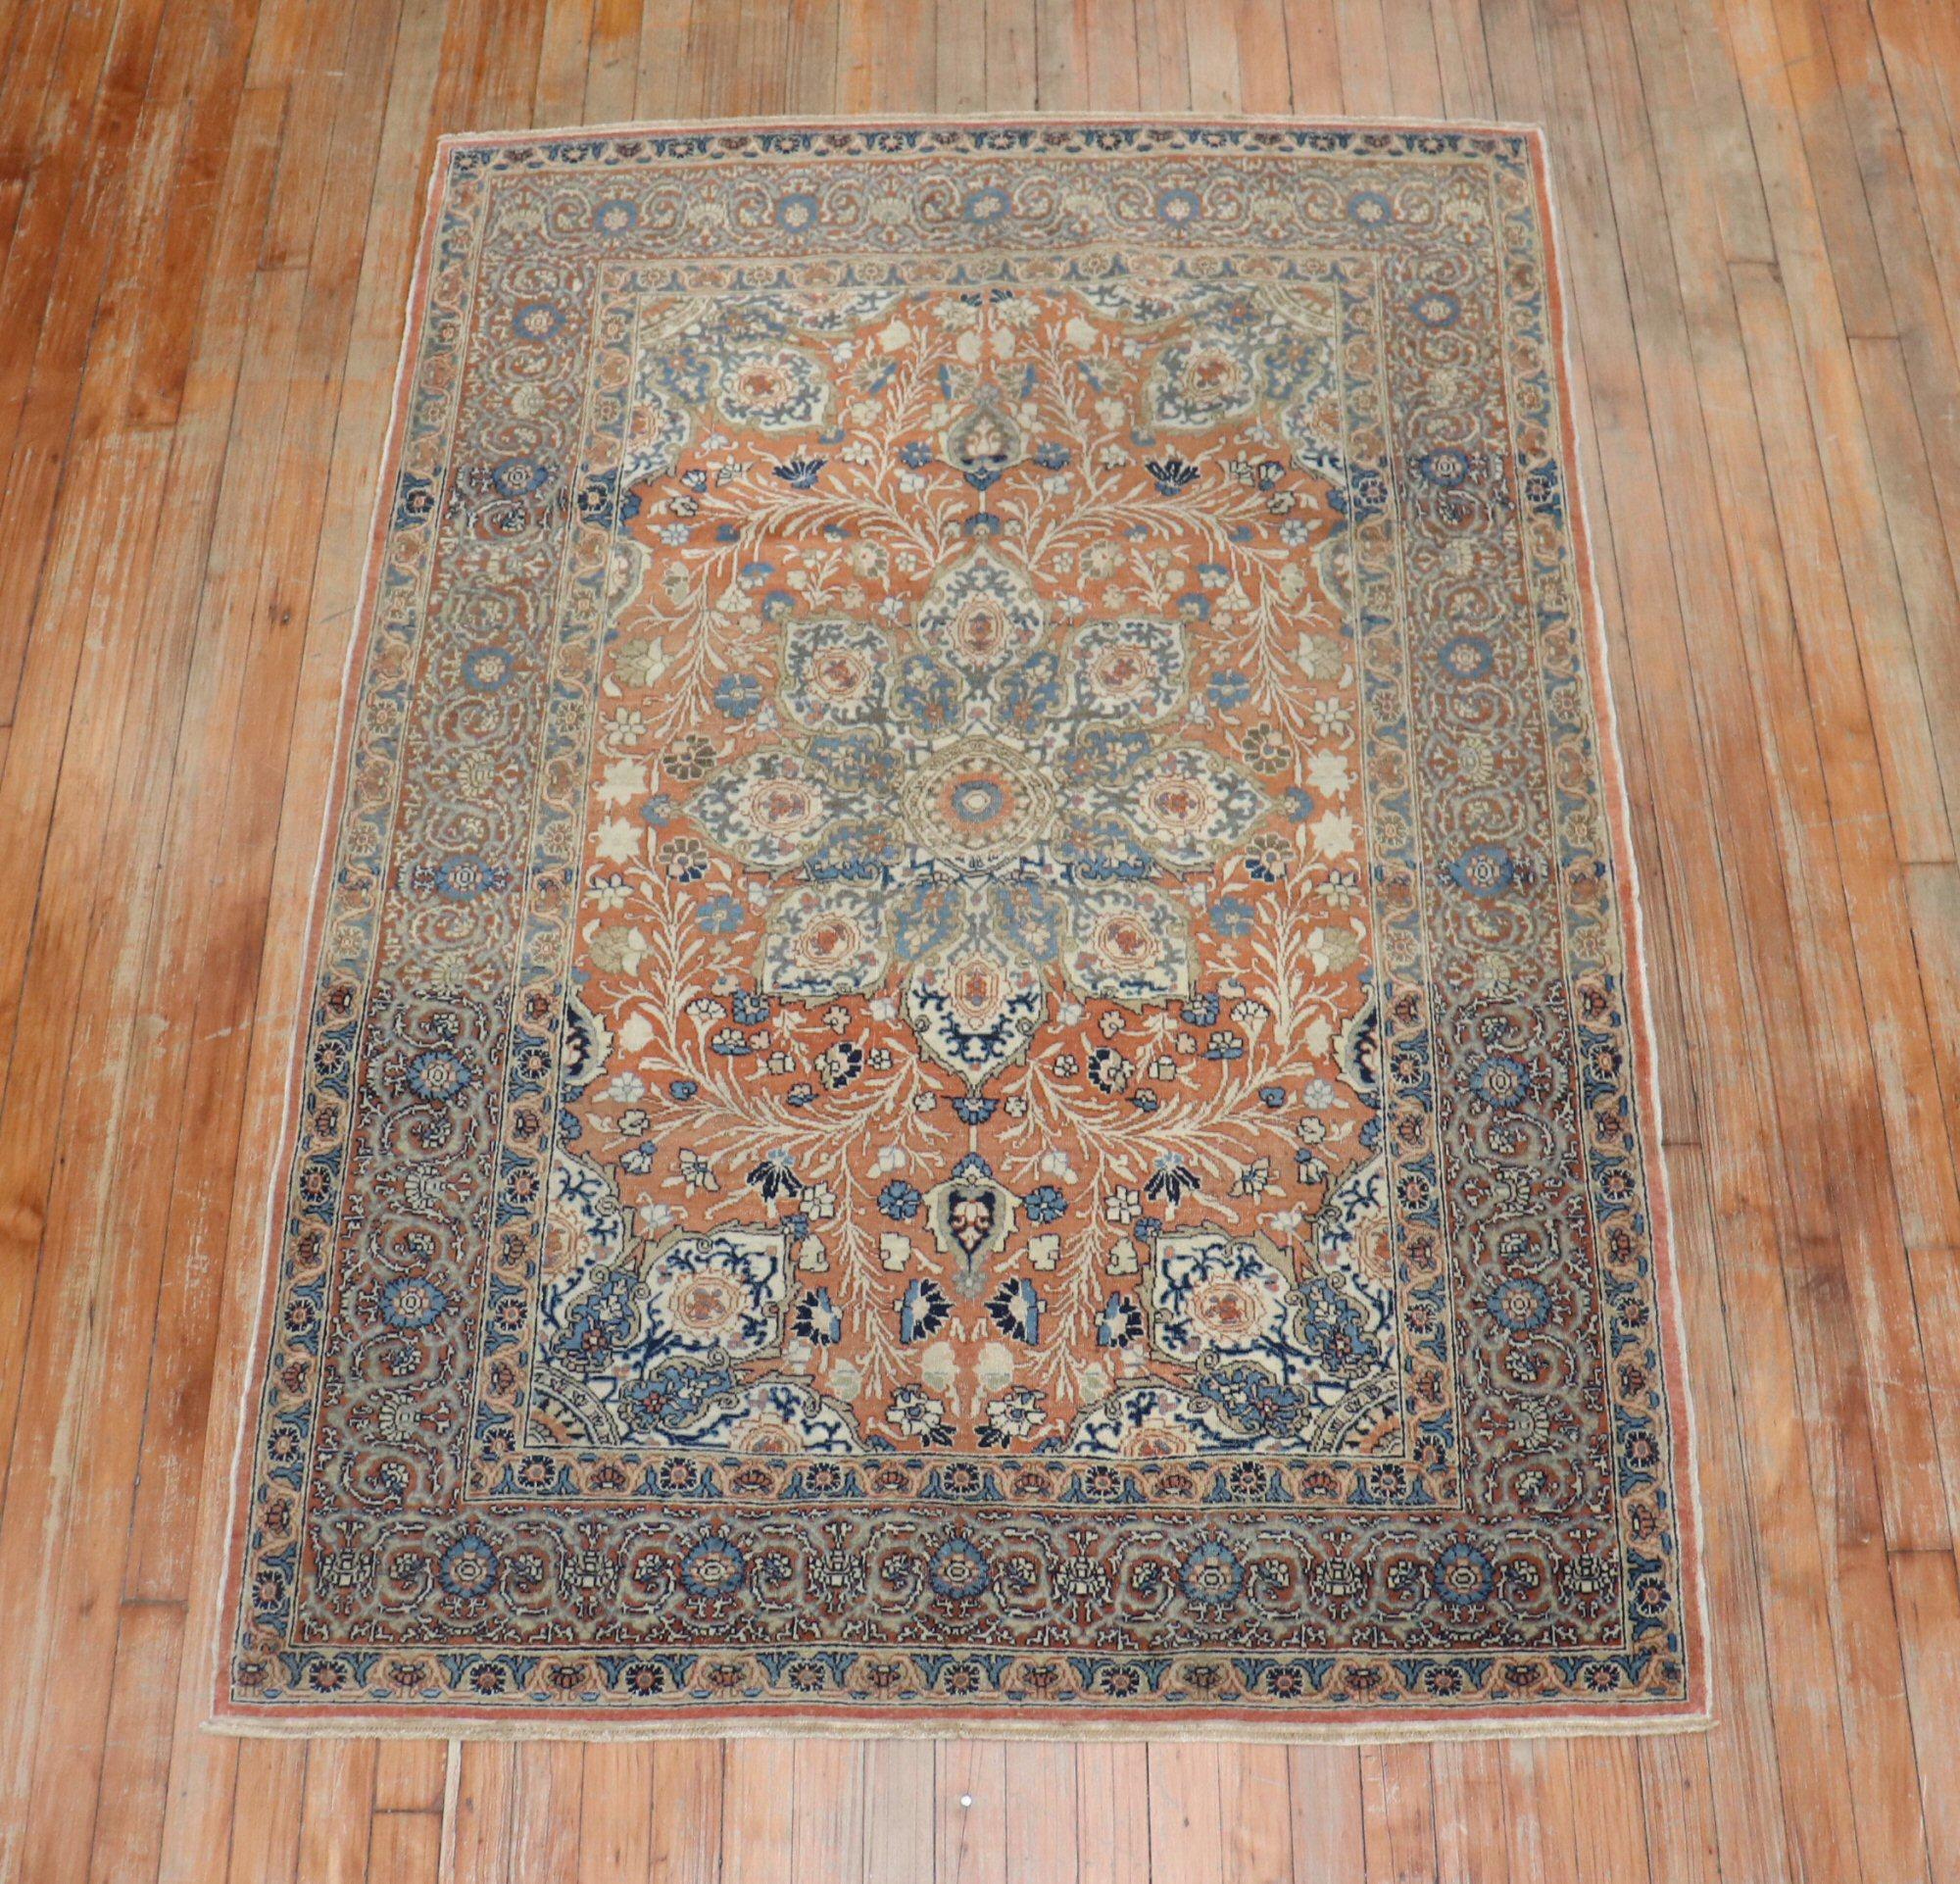 Classic Persian Tabriz rug with a copper color ground, accents in brown and blue.

Measures: 4'1